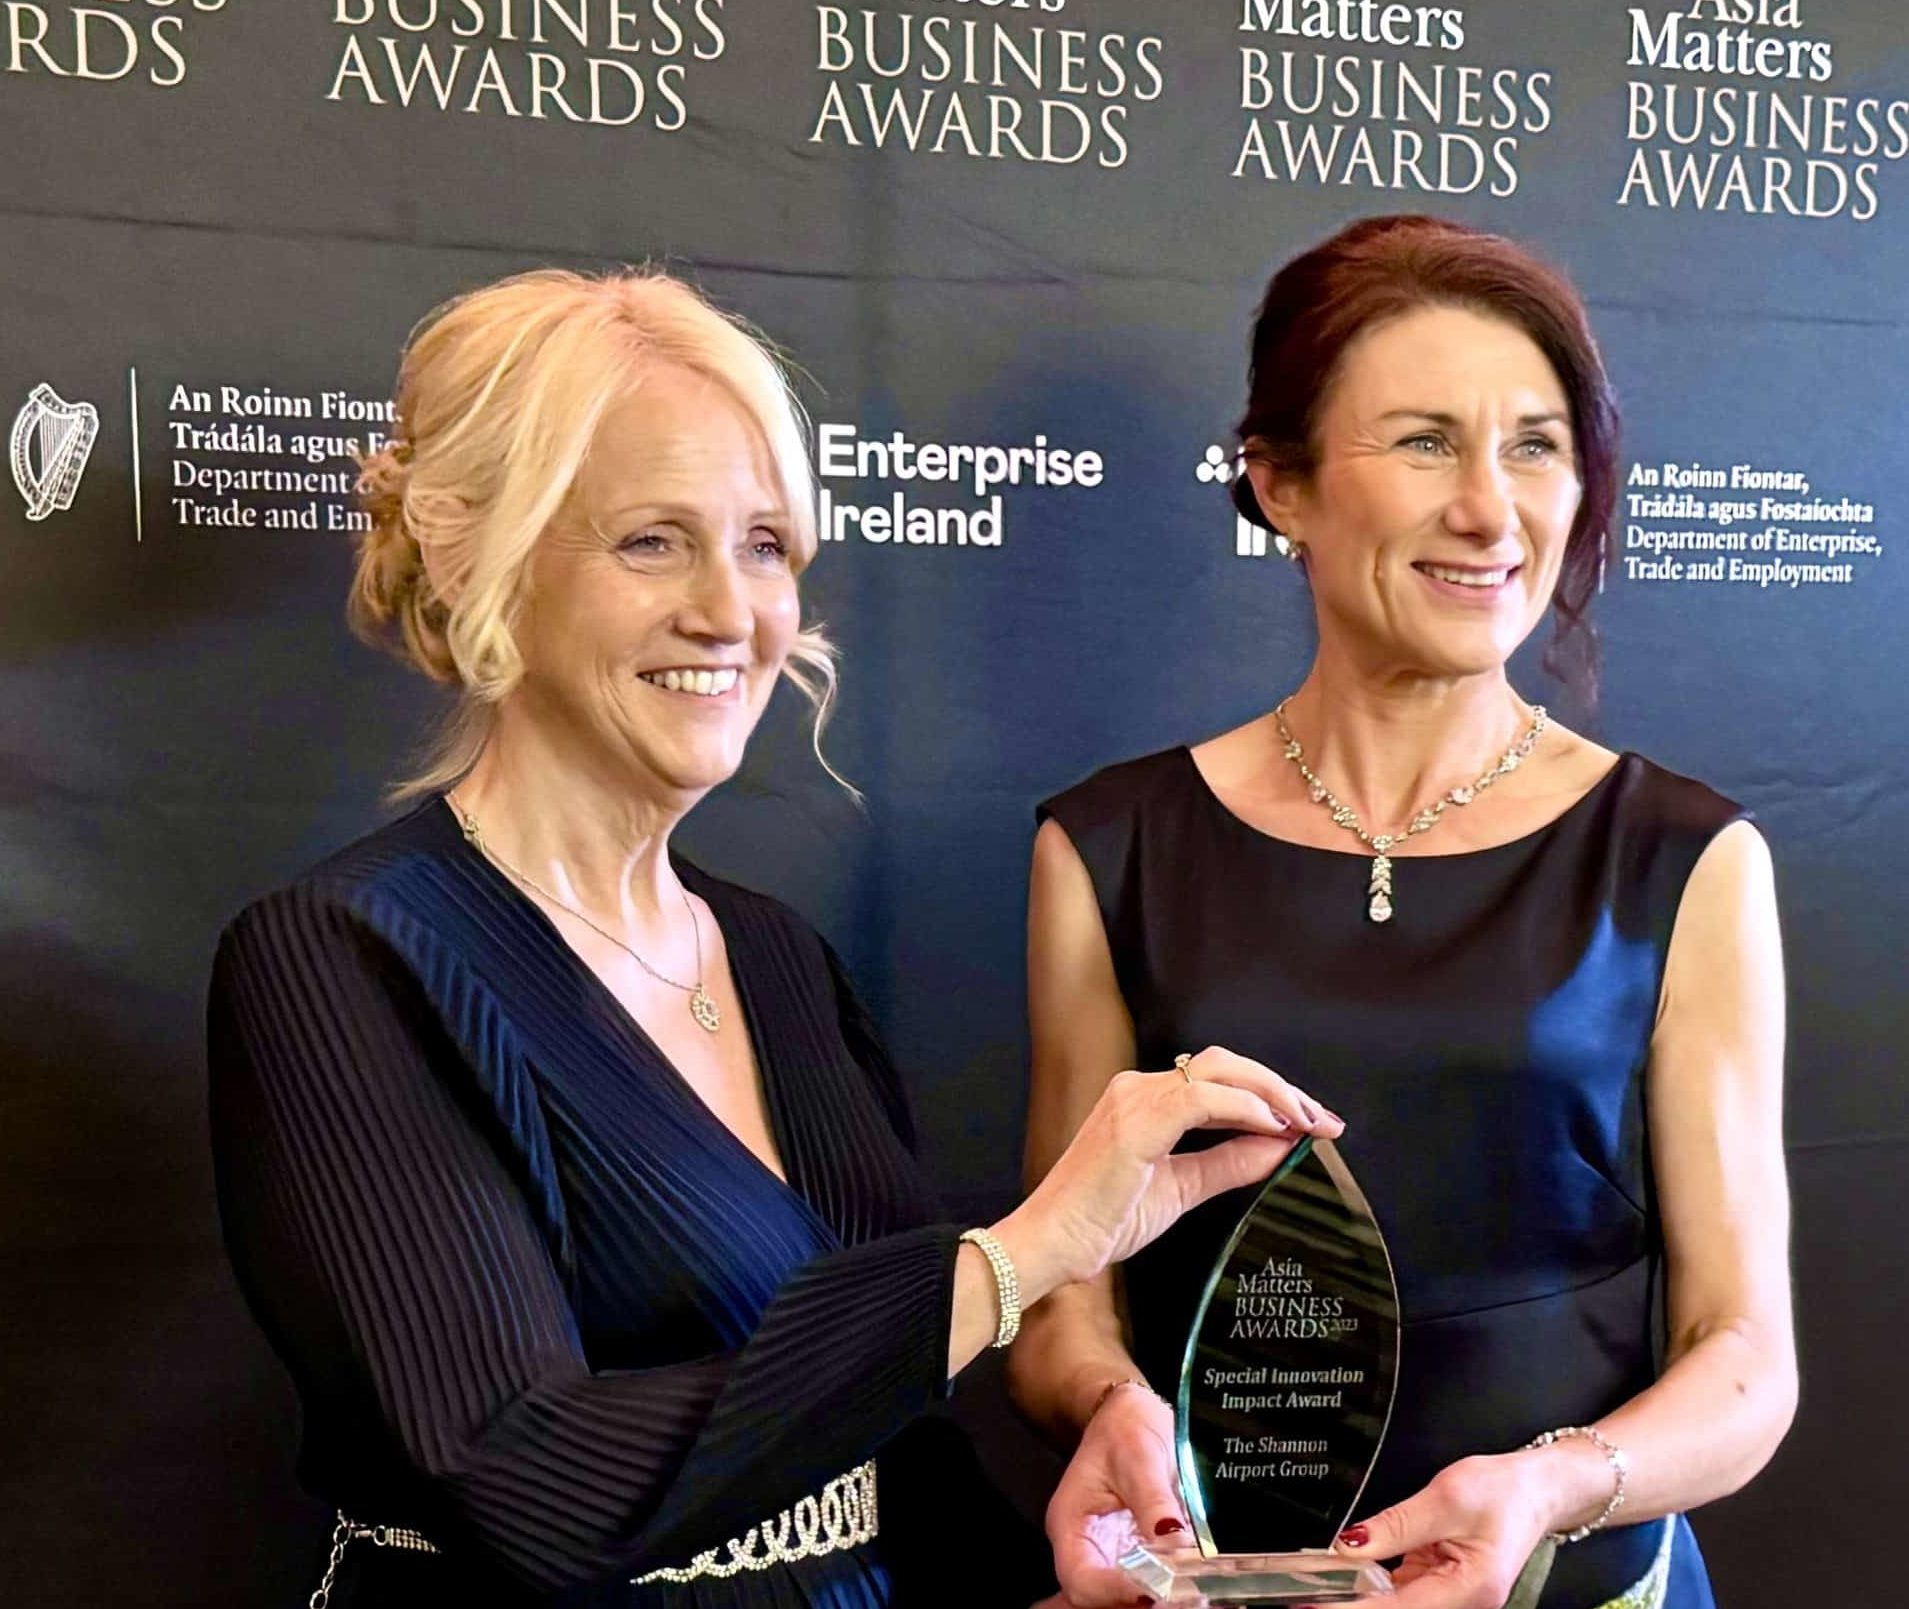 Shannon Airport Receives Innovation Impact Award from Asia Matters